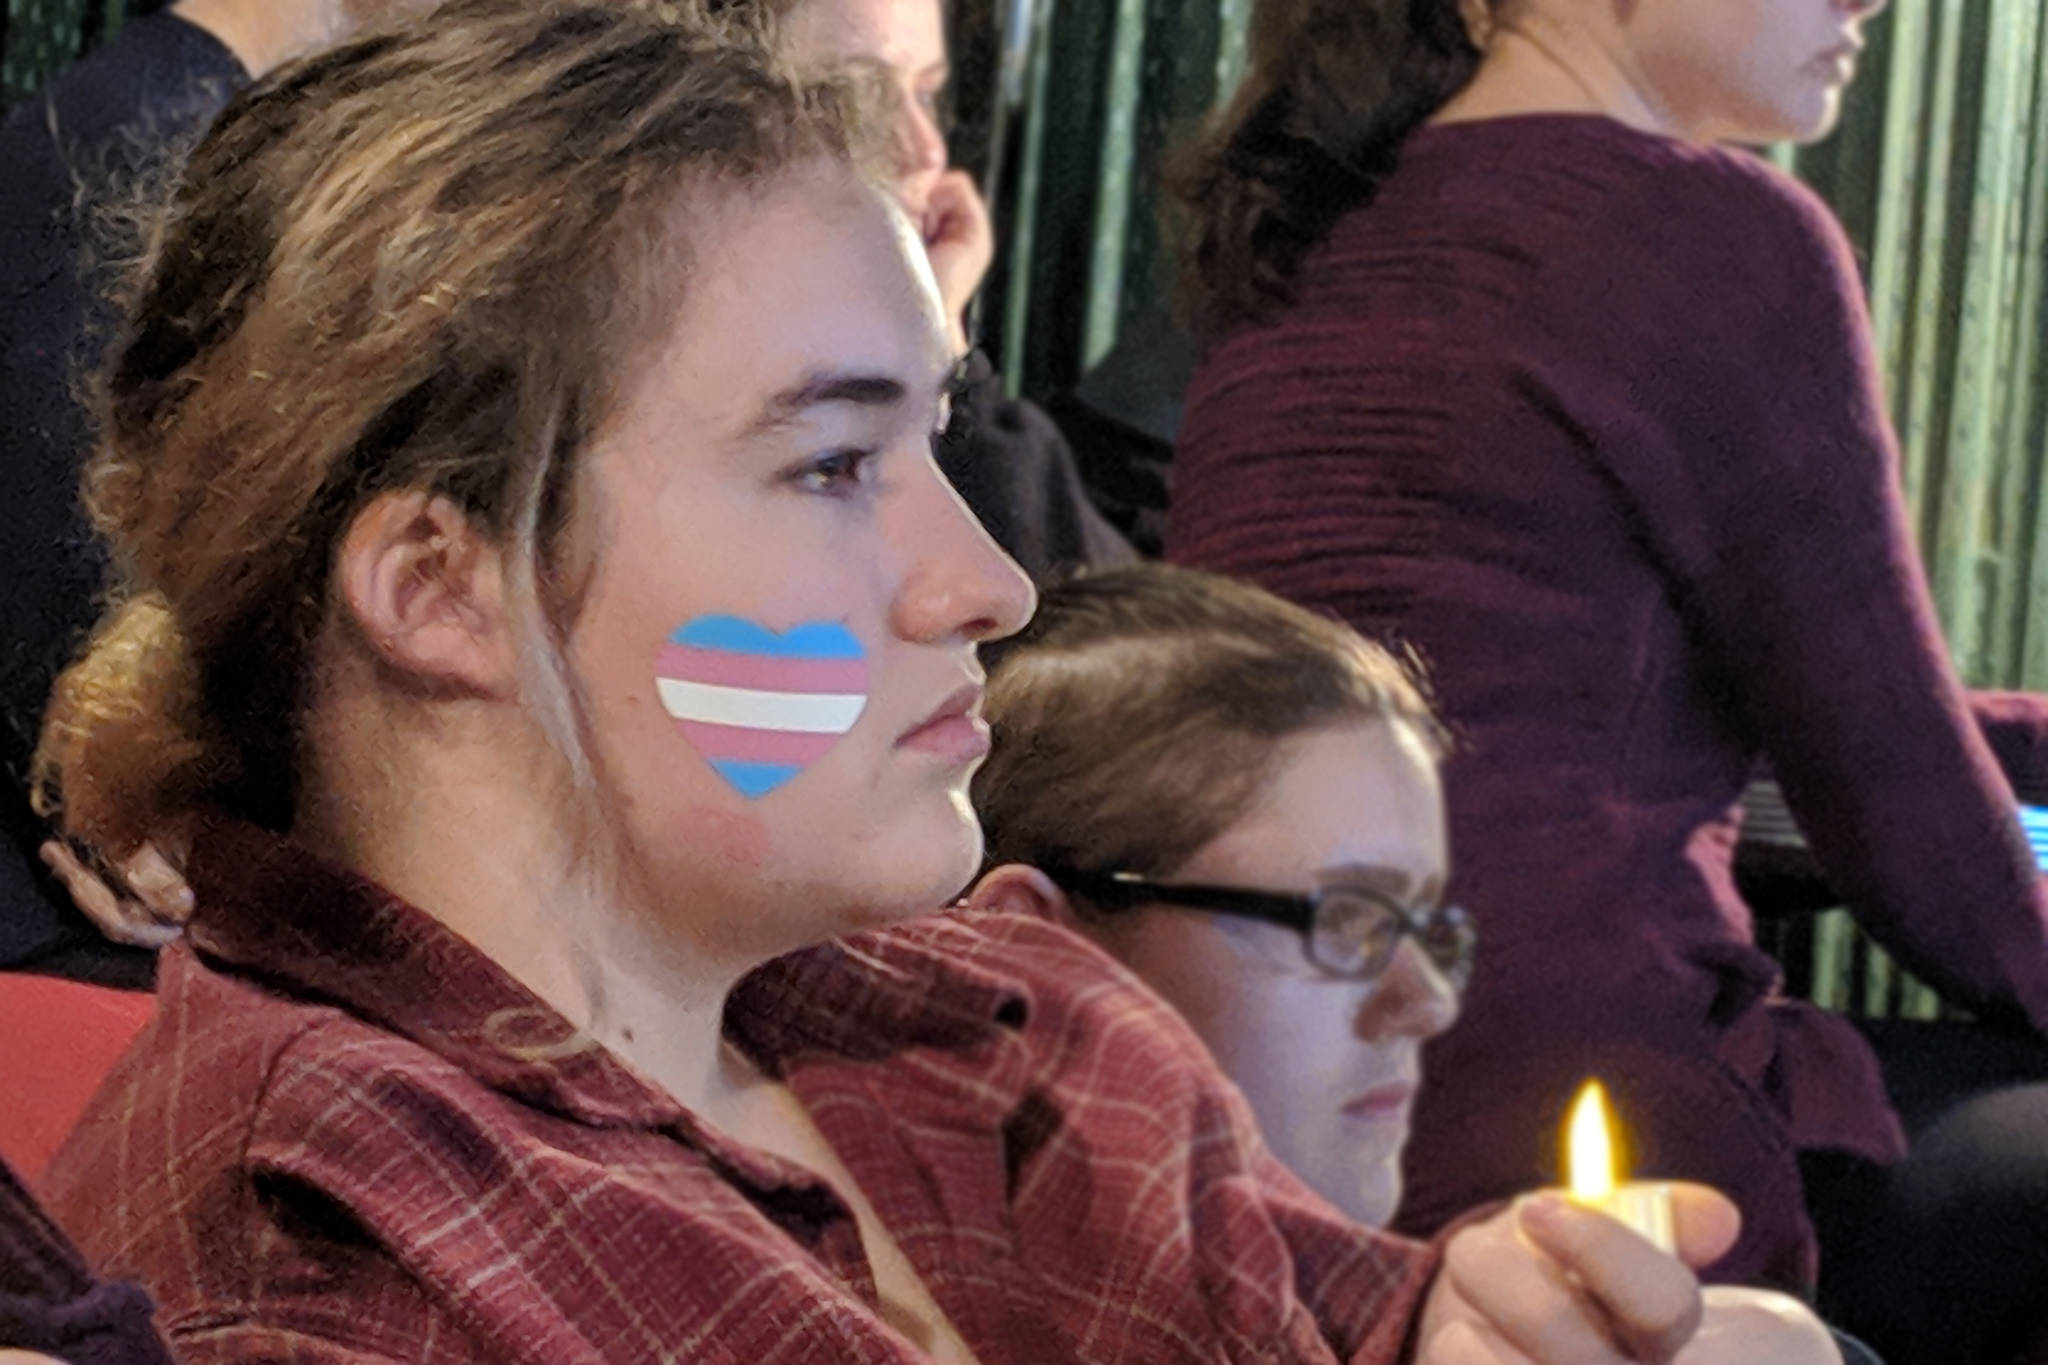 Sage Zahnd, a transgender high school student, takes in the reading of names of transgender people who were killed by violence in the U.S. during the Transgender Day of Remembrance candlelight vigil held Tuesday, Nov. 20 in Gold Town Nickelodeon. (Ben Hohenstatt | Capital City Weekly)